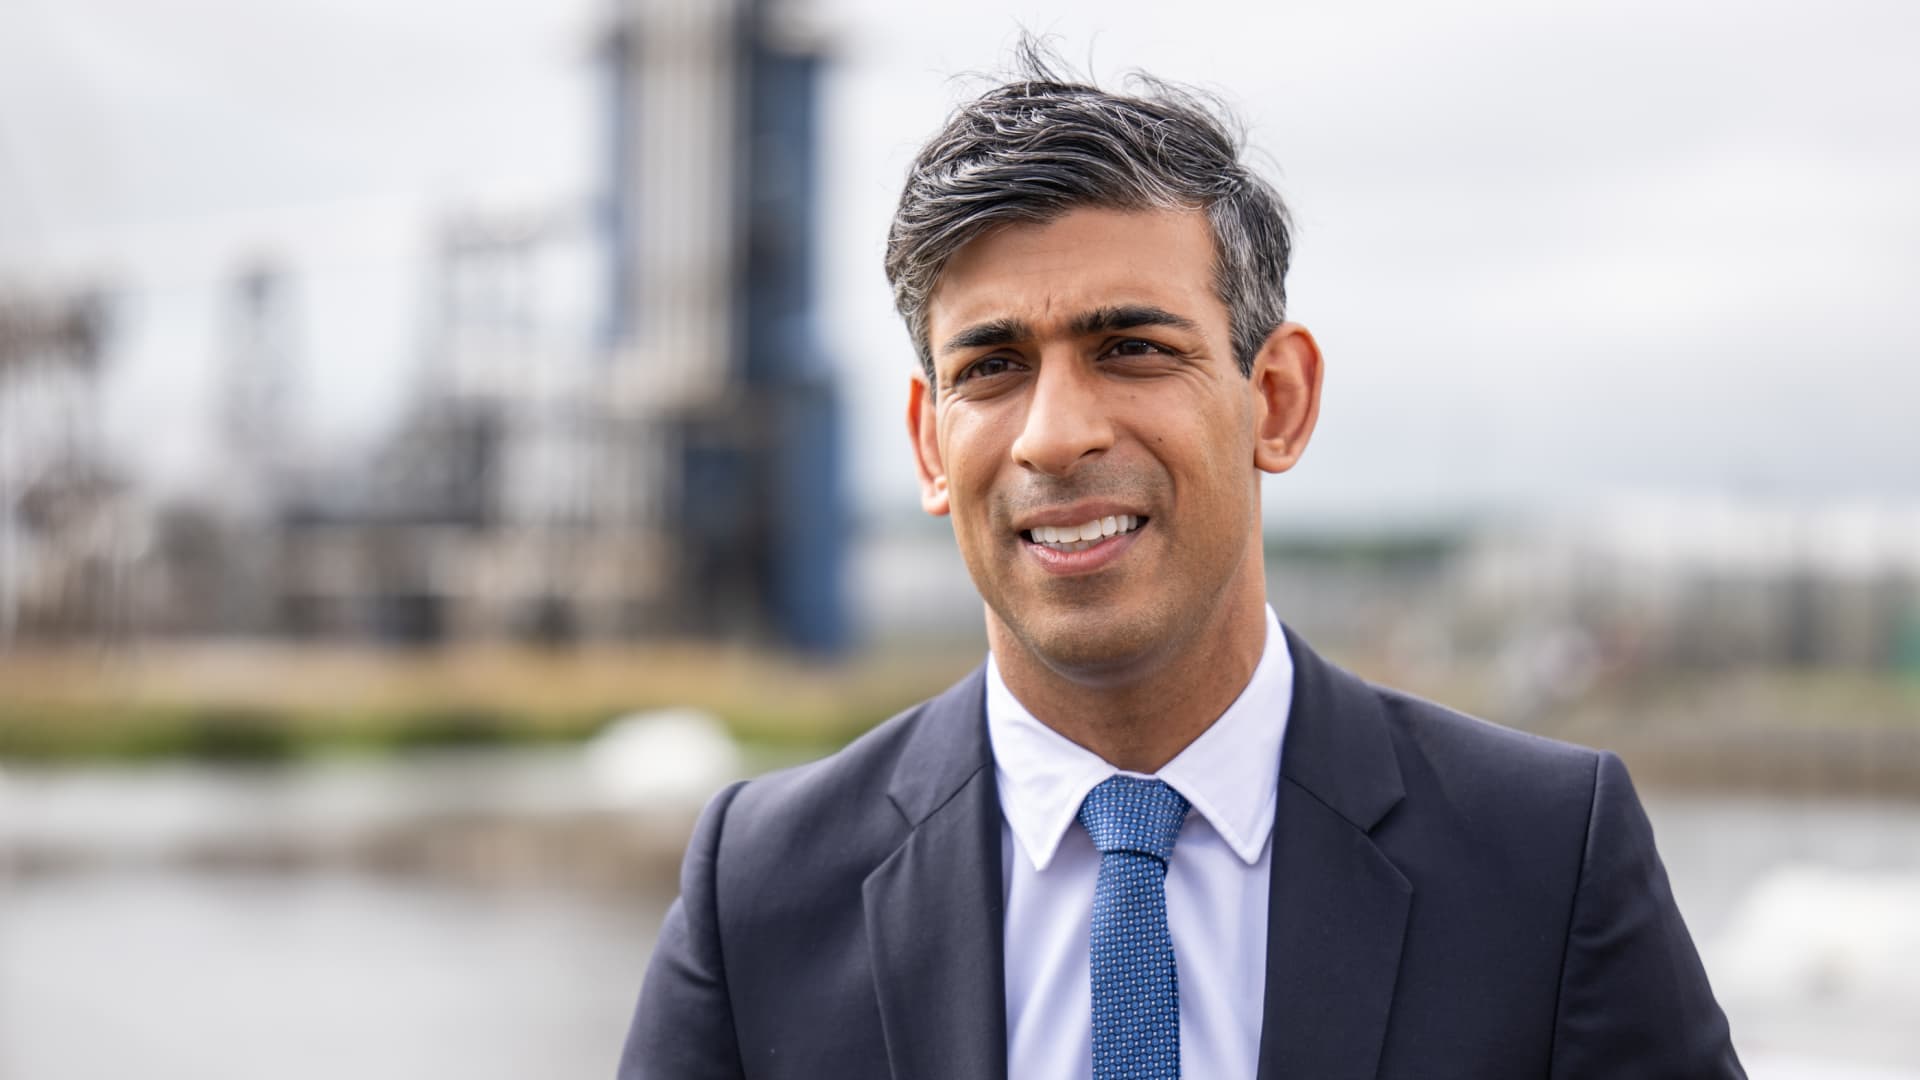 UK PM Rishi Sunak announces shift on climate policies, waters down targets